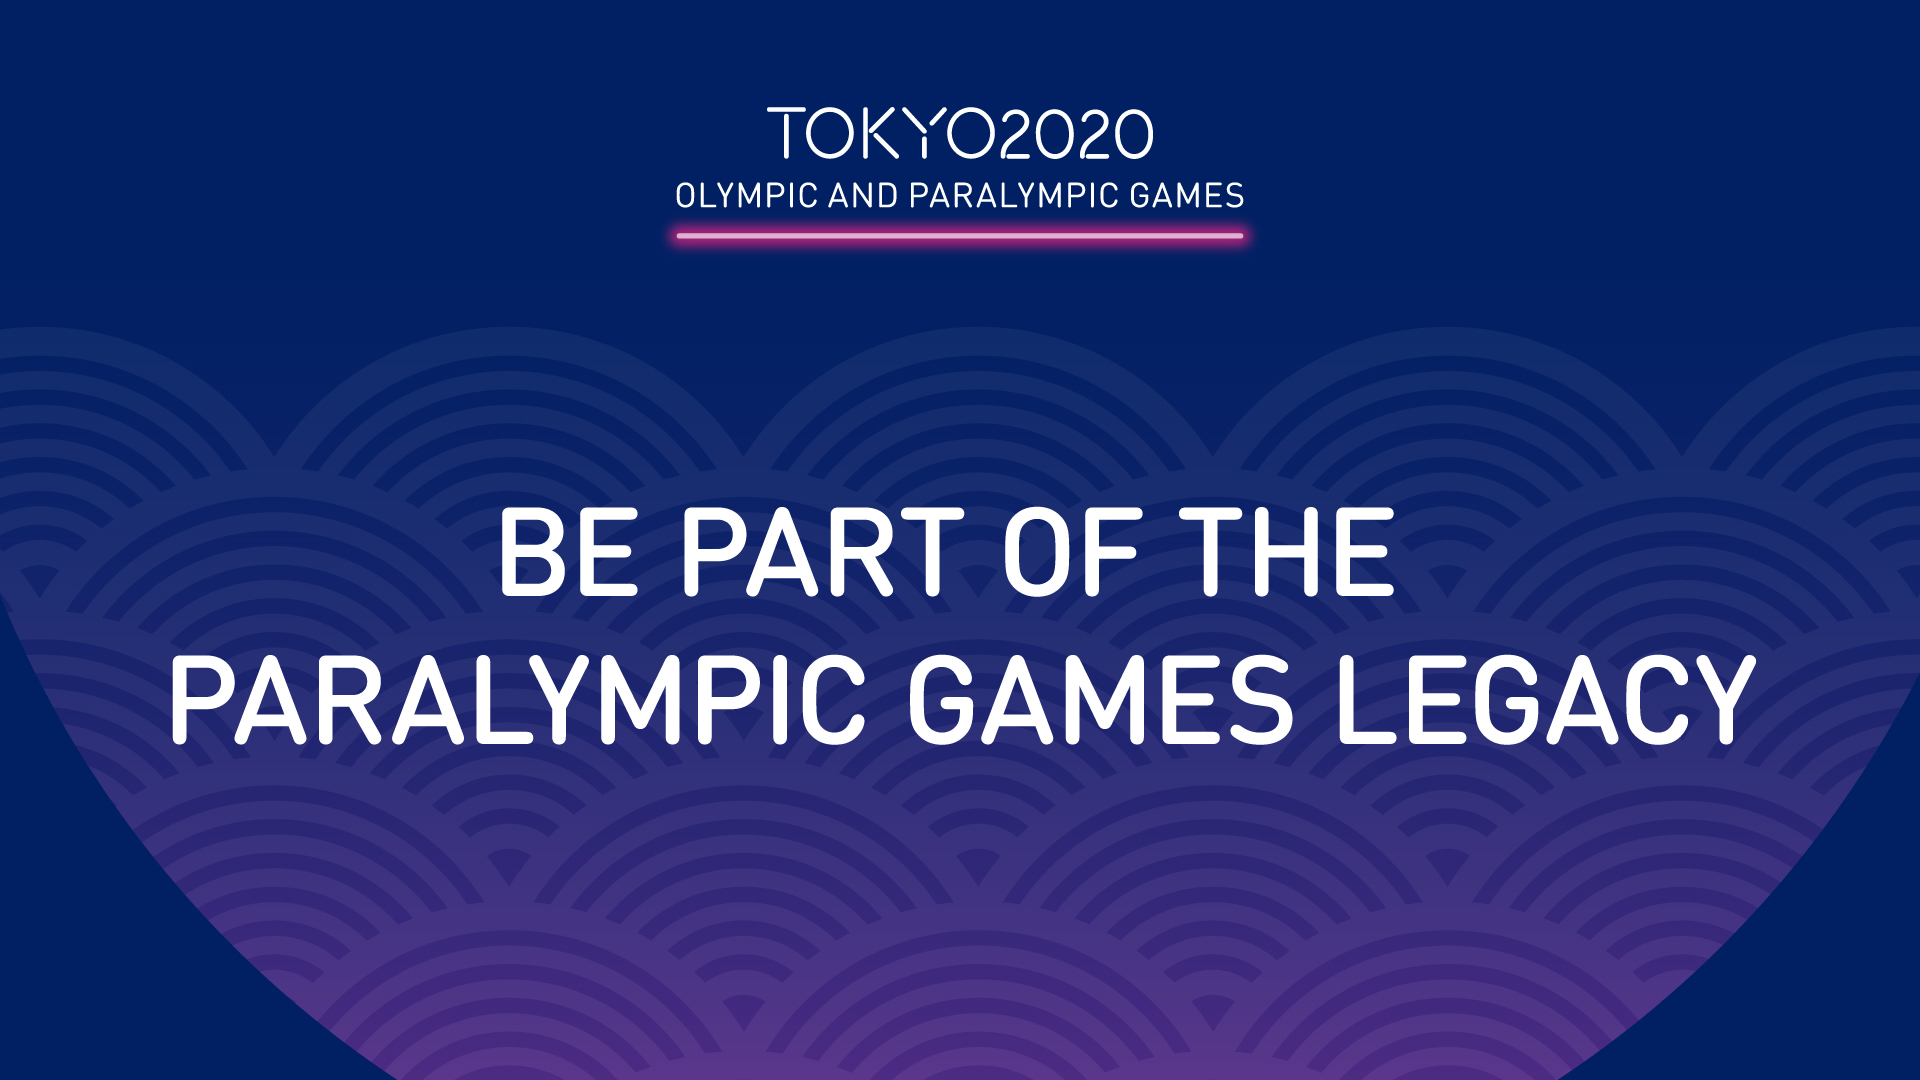 a graphic of tokyo 2020 Olympic and Paralympic games 